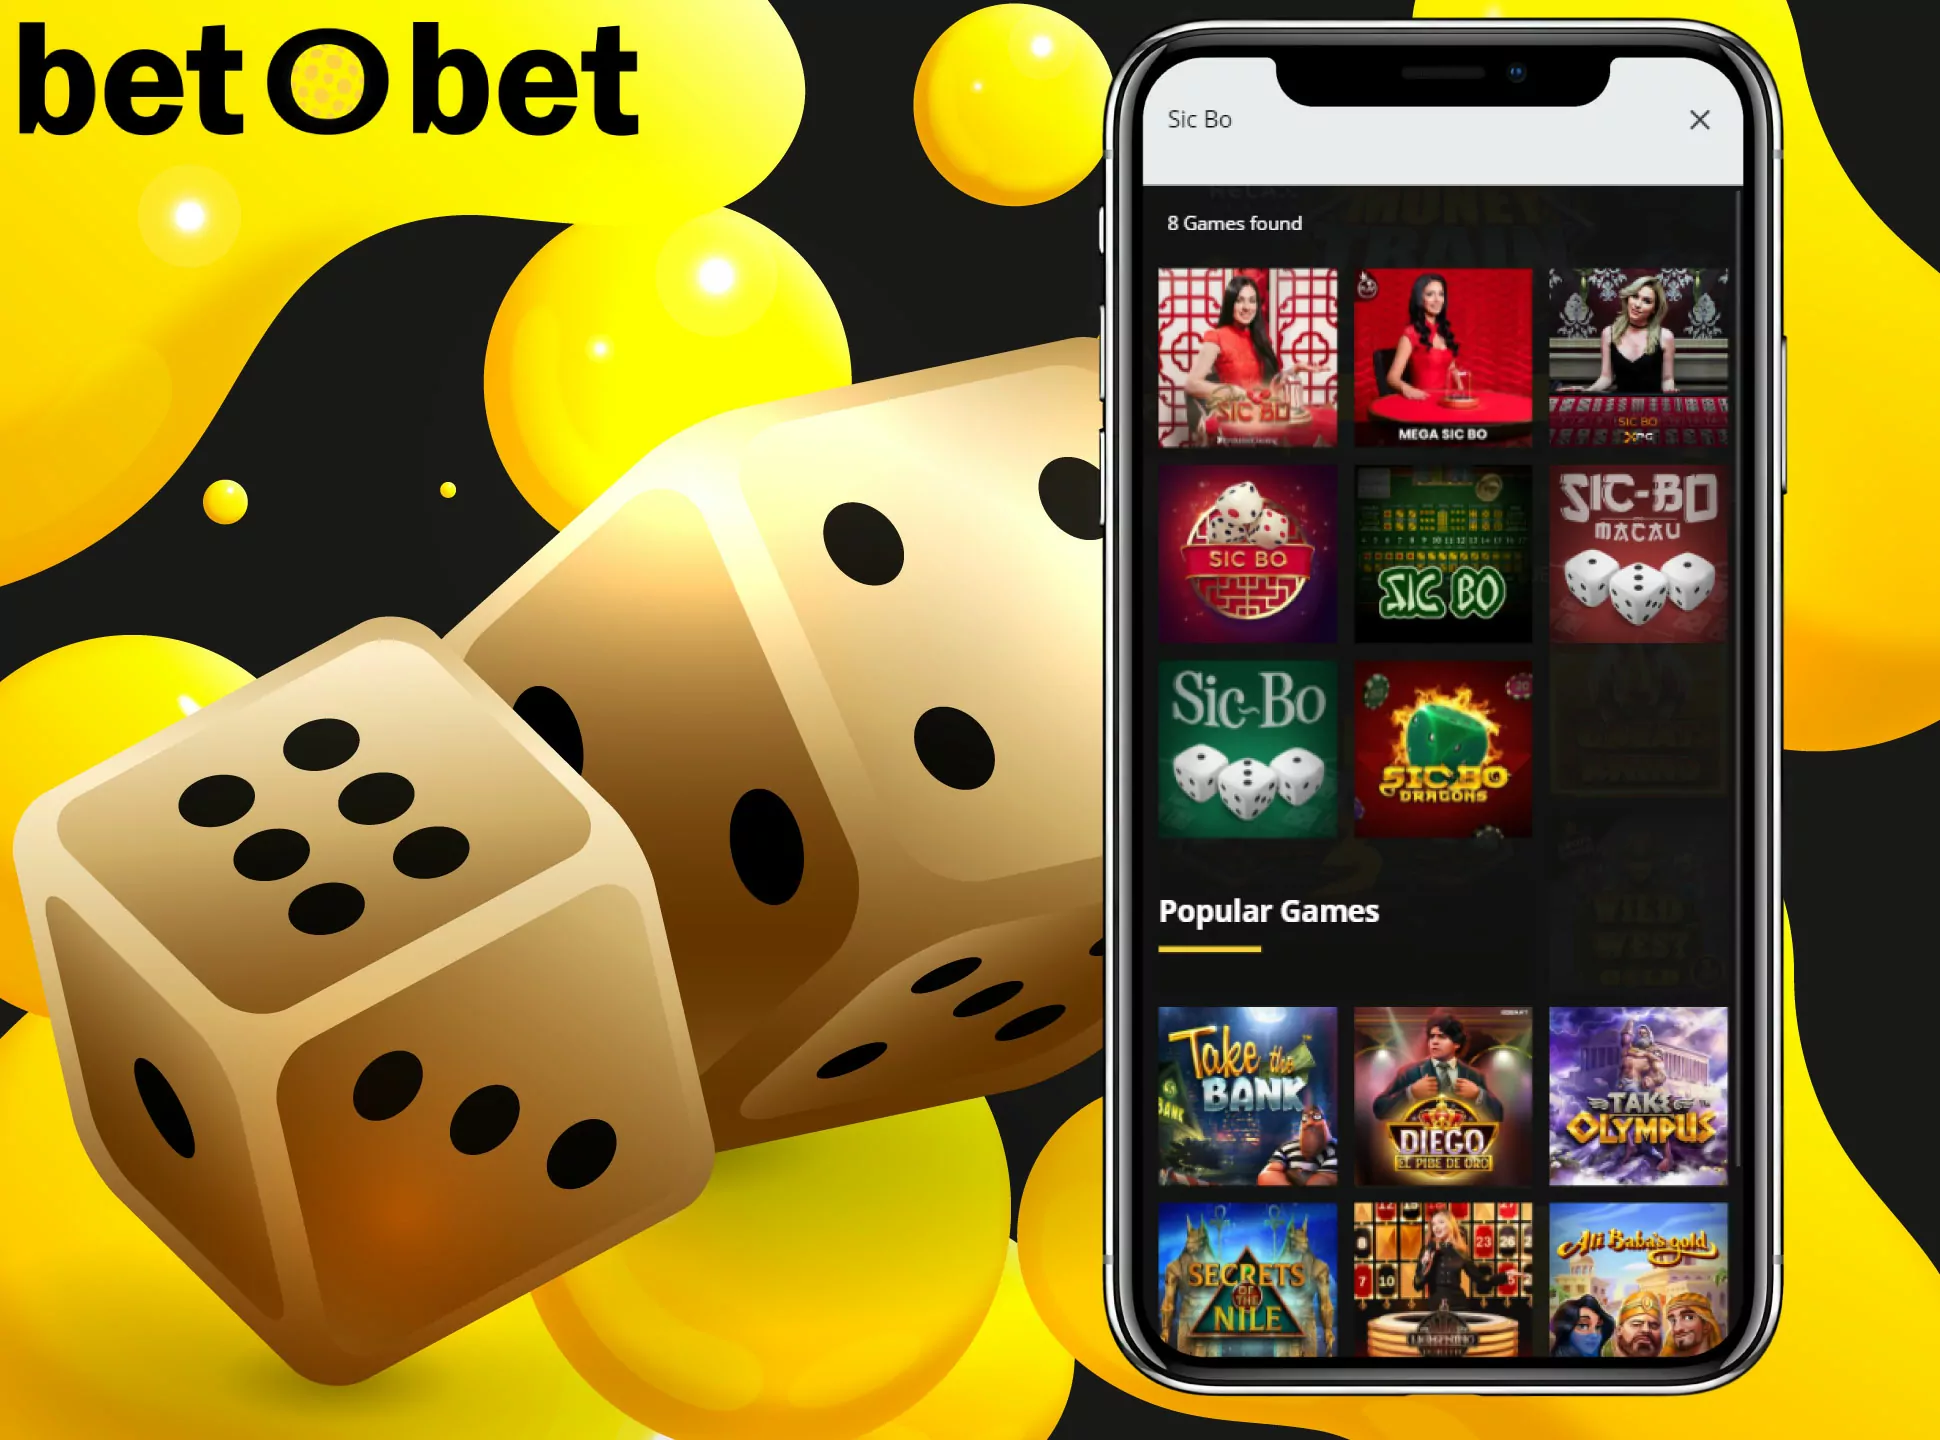 Live Sic Bo is available for playing at Betobet.